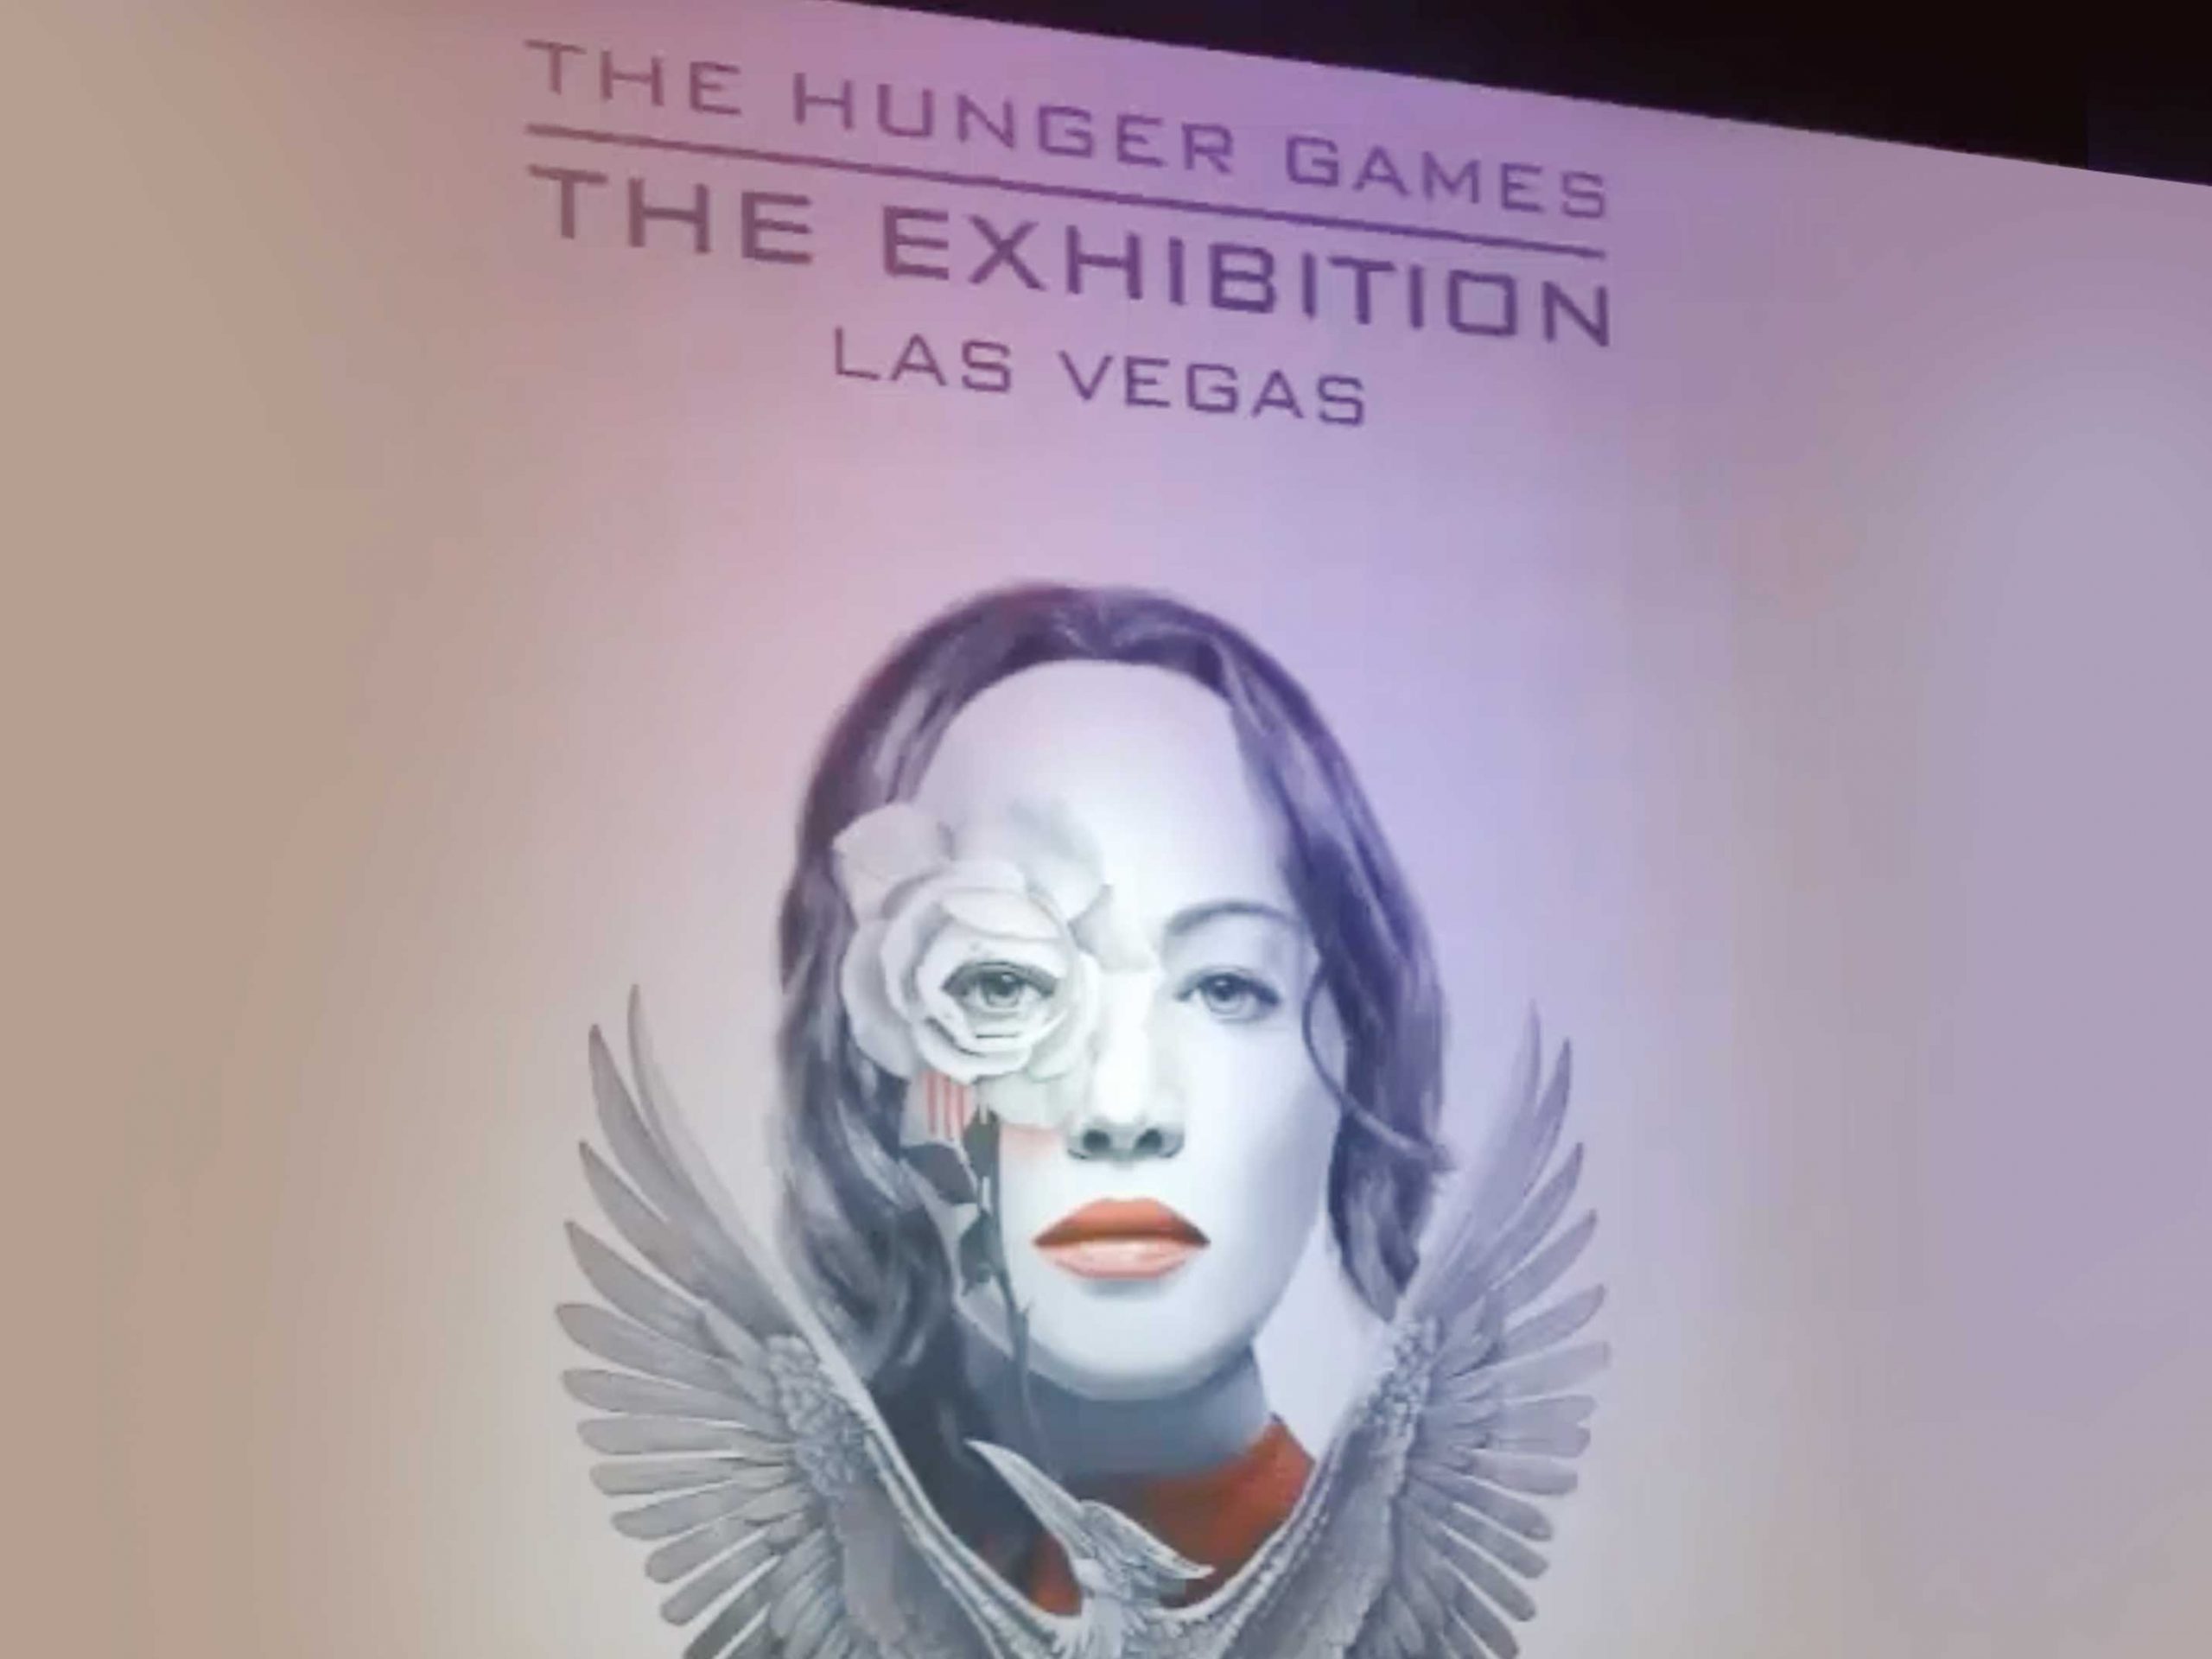 TEA Digital Presents – The Hunger Games: The Exhibition A Behind The Scenes Look